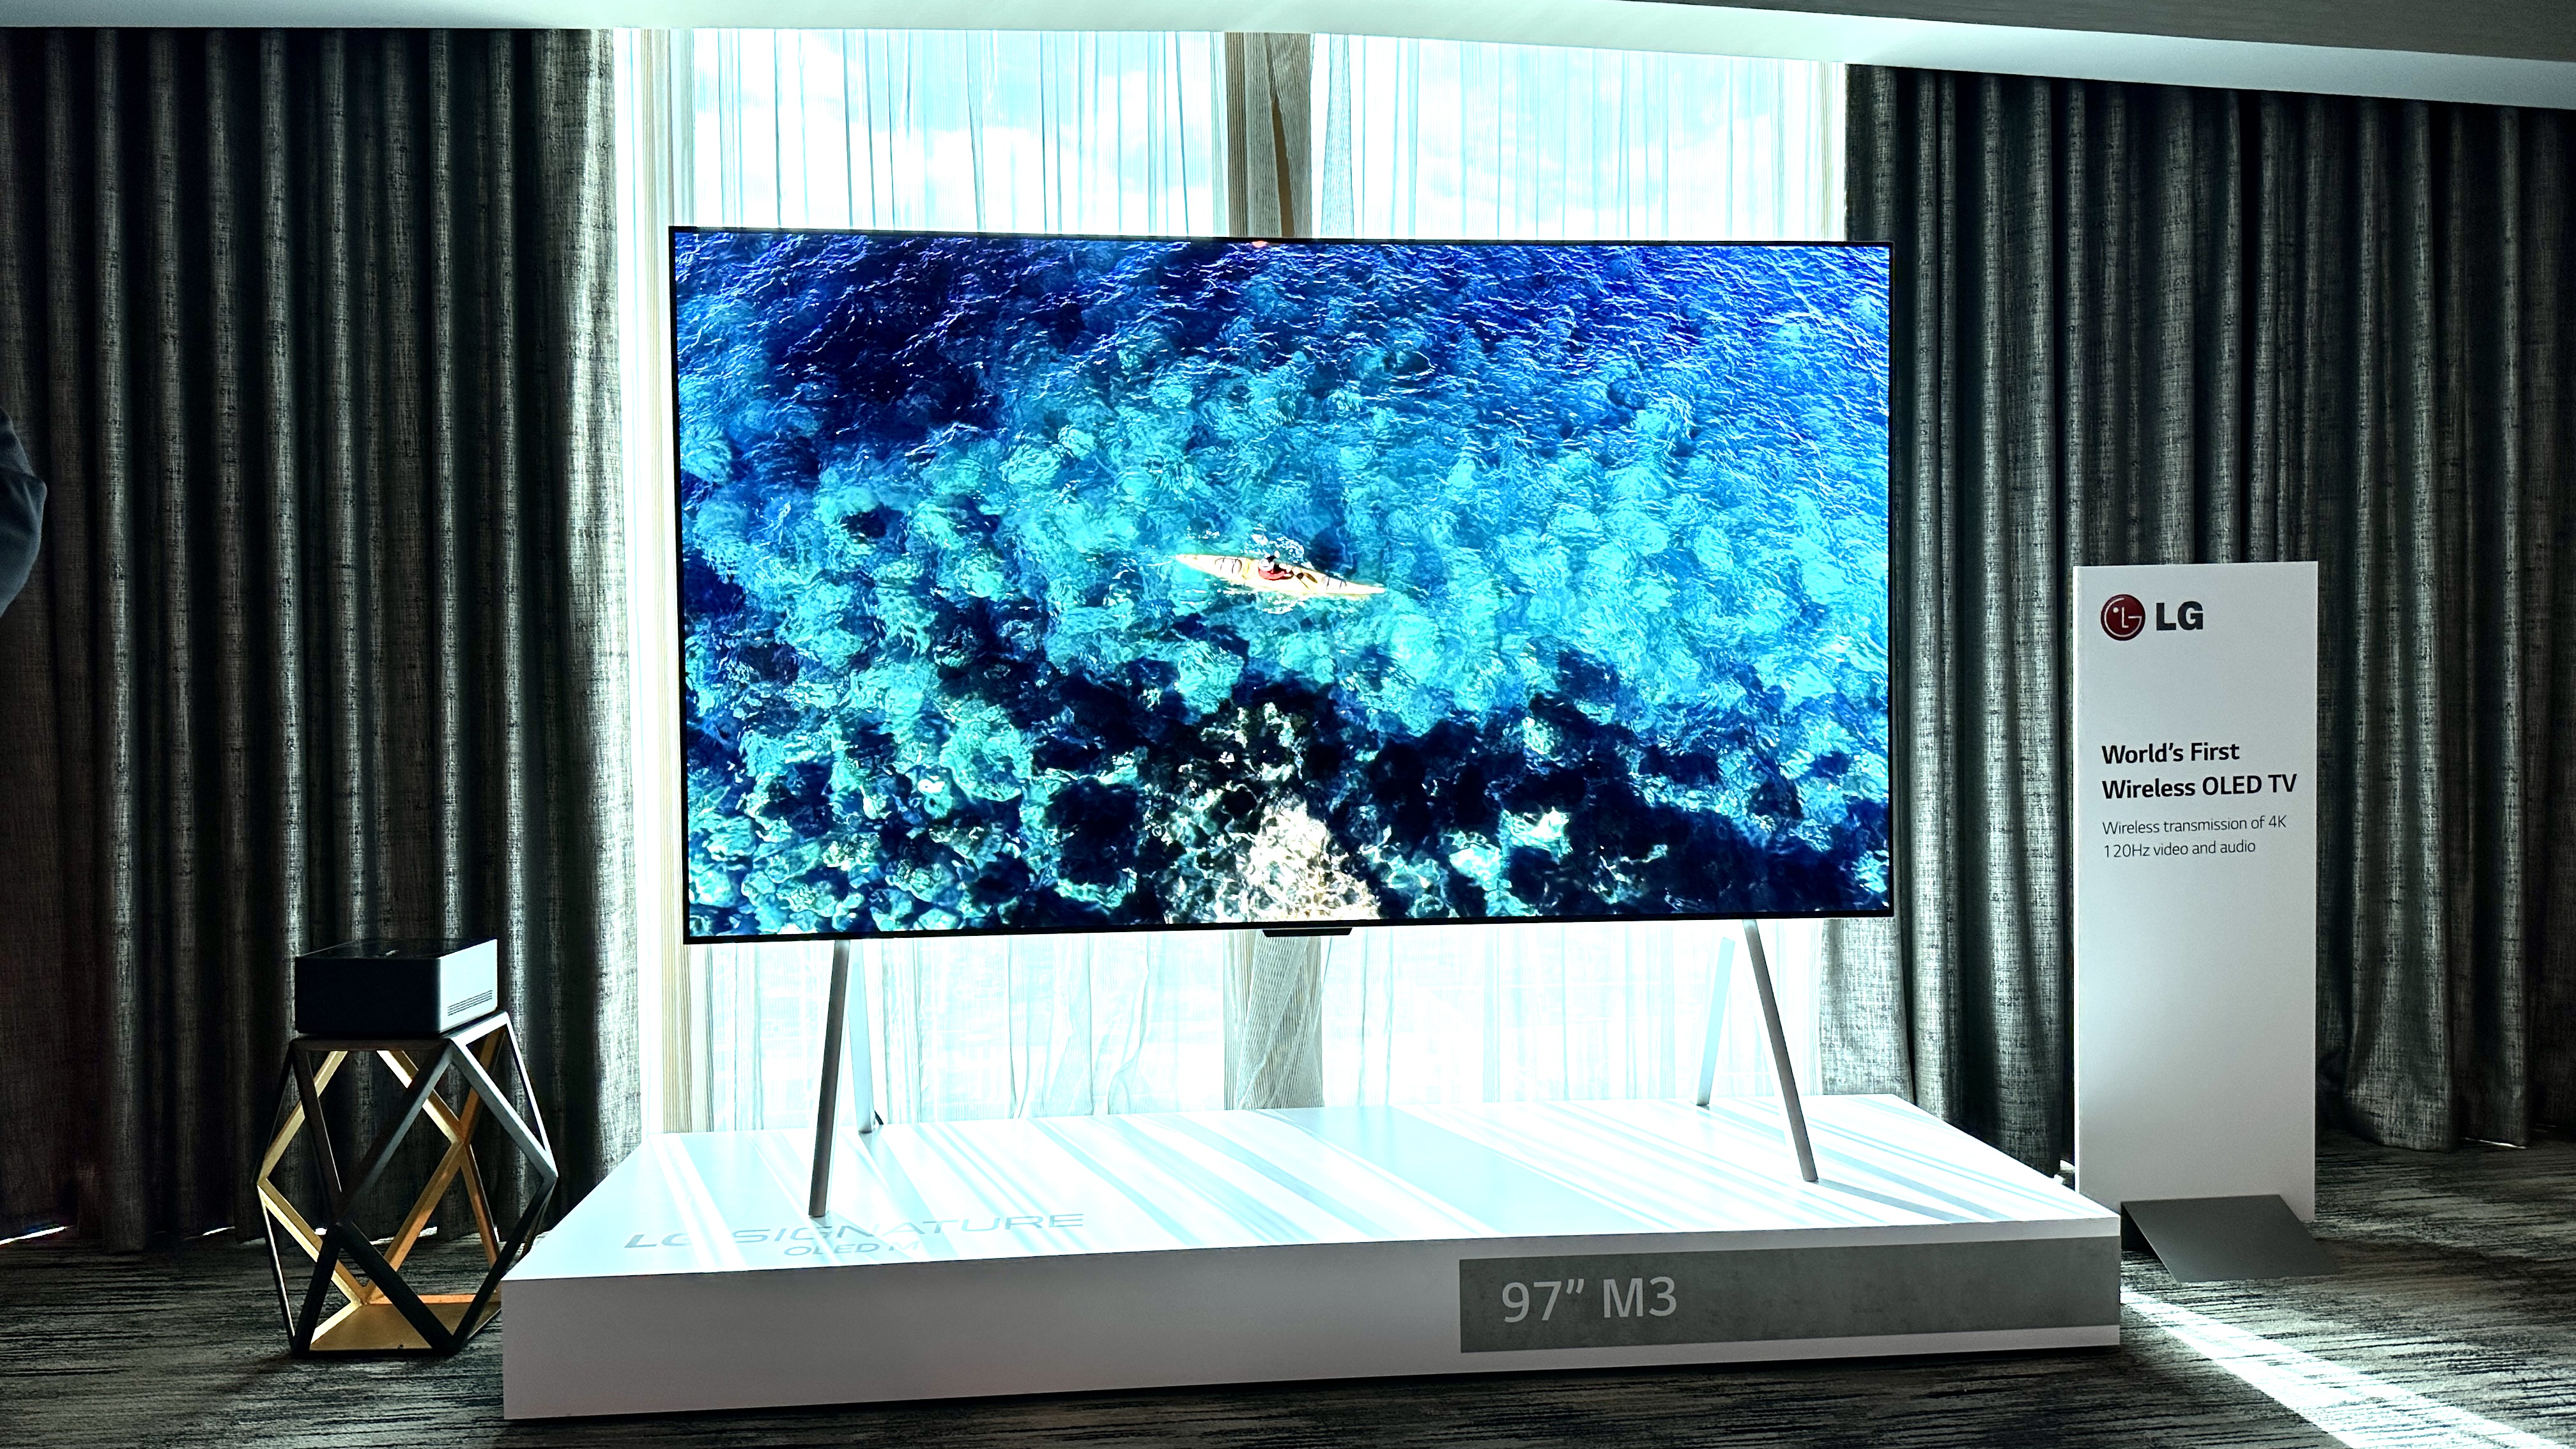 LG's wireless M-Series OLED TV tech is the future we need